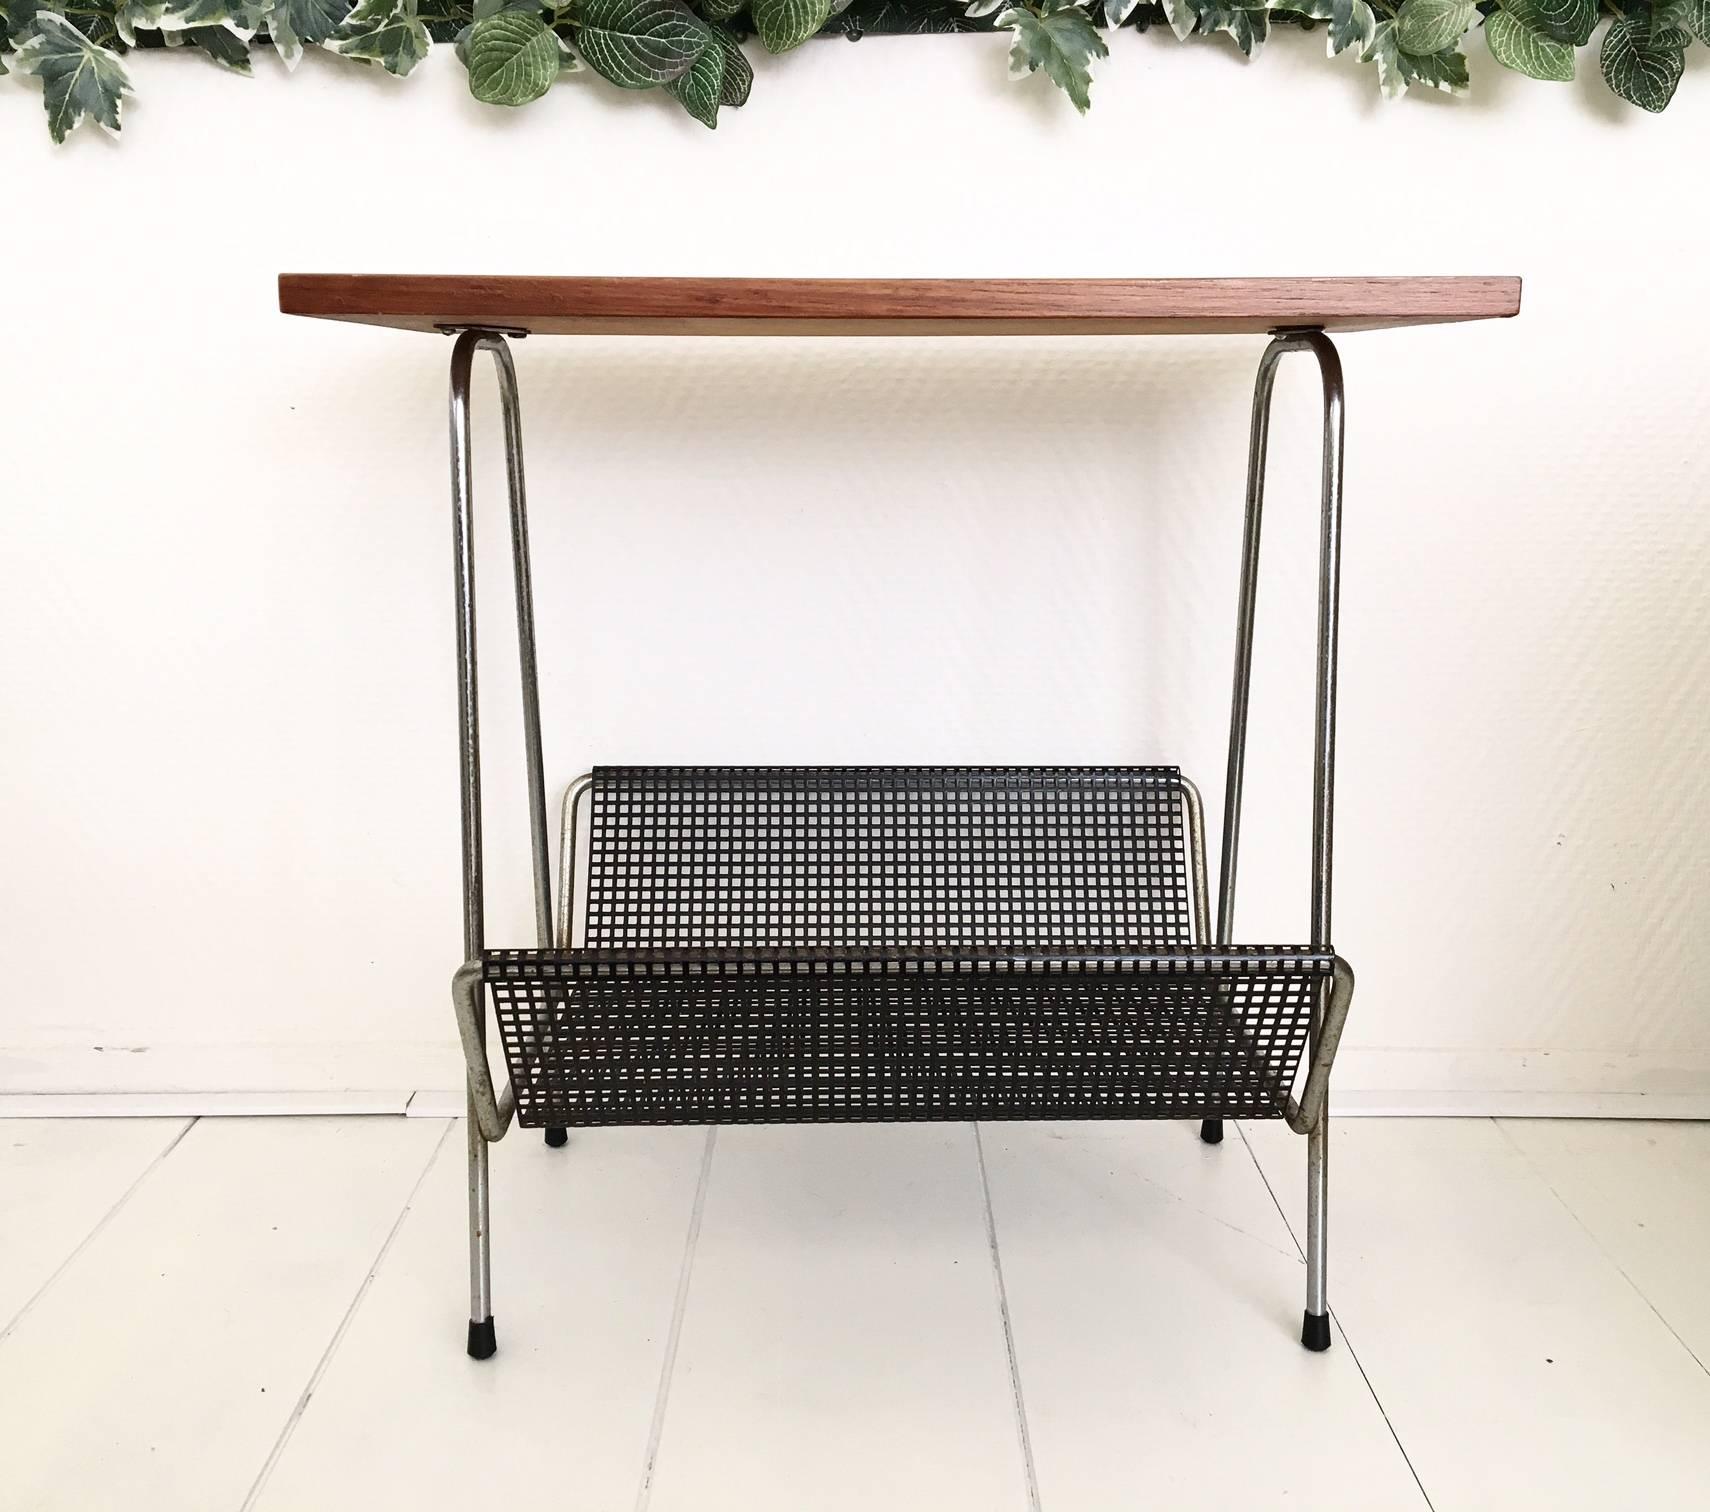 This elegant magazine rack was most likely manufactured by Pilastro circa 1950s-1960s in The Netherlands. It features a Teak top and a black perforated metal basket. Although it shows some oxidation to it's frame, it remains in wonderful solid